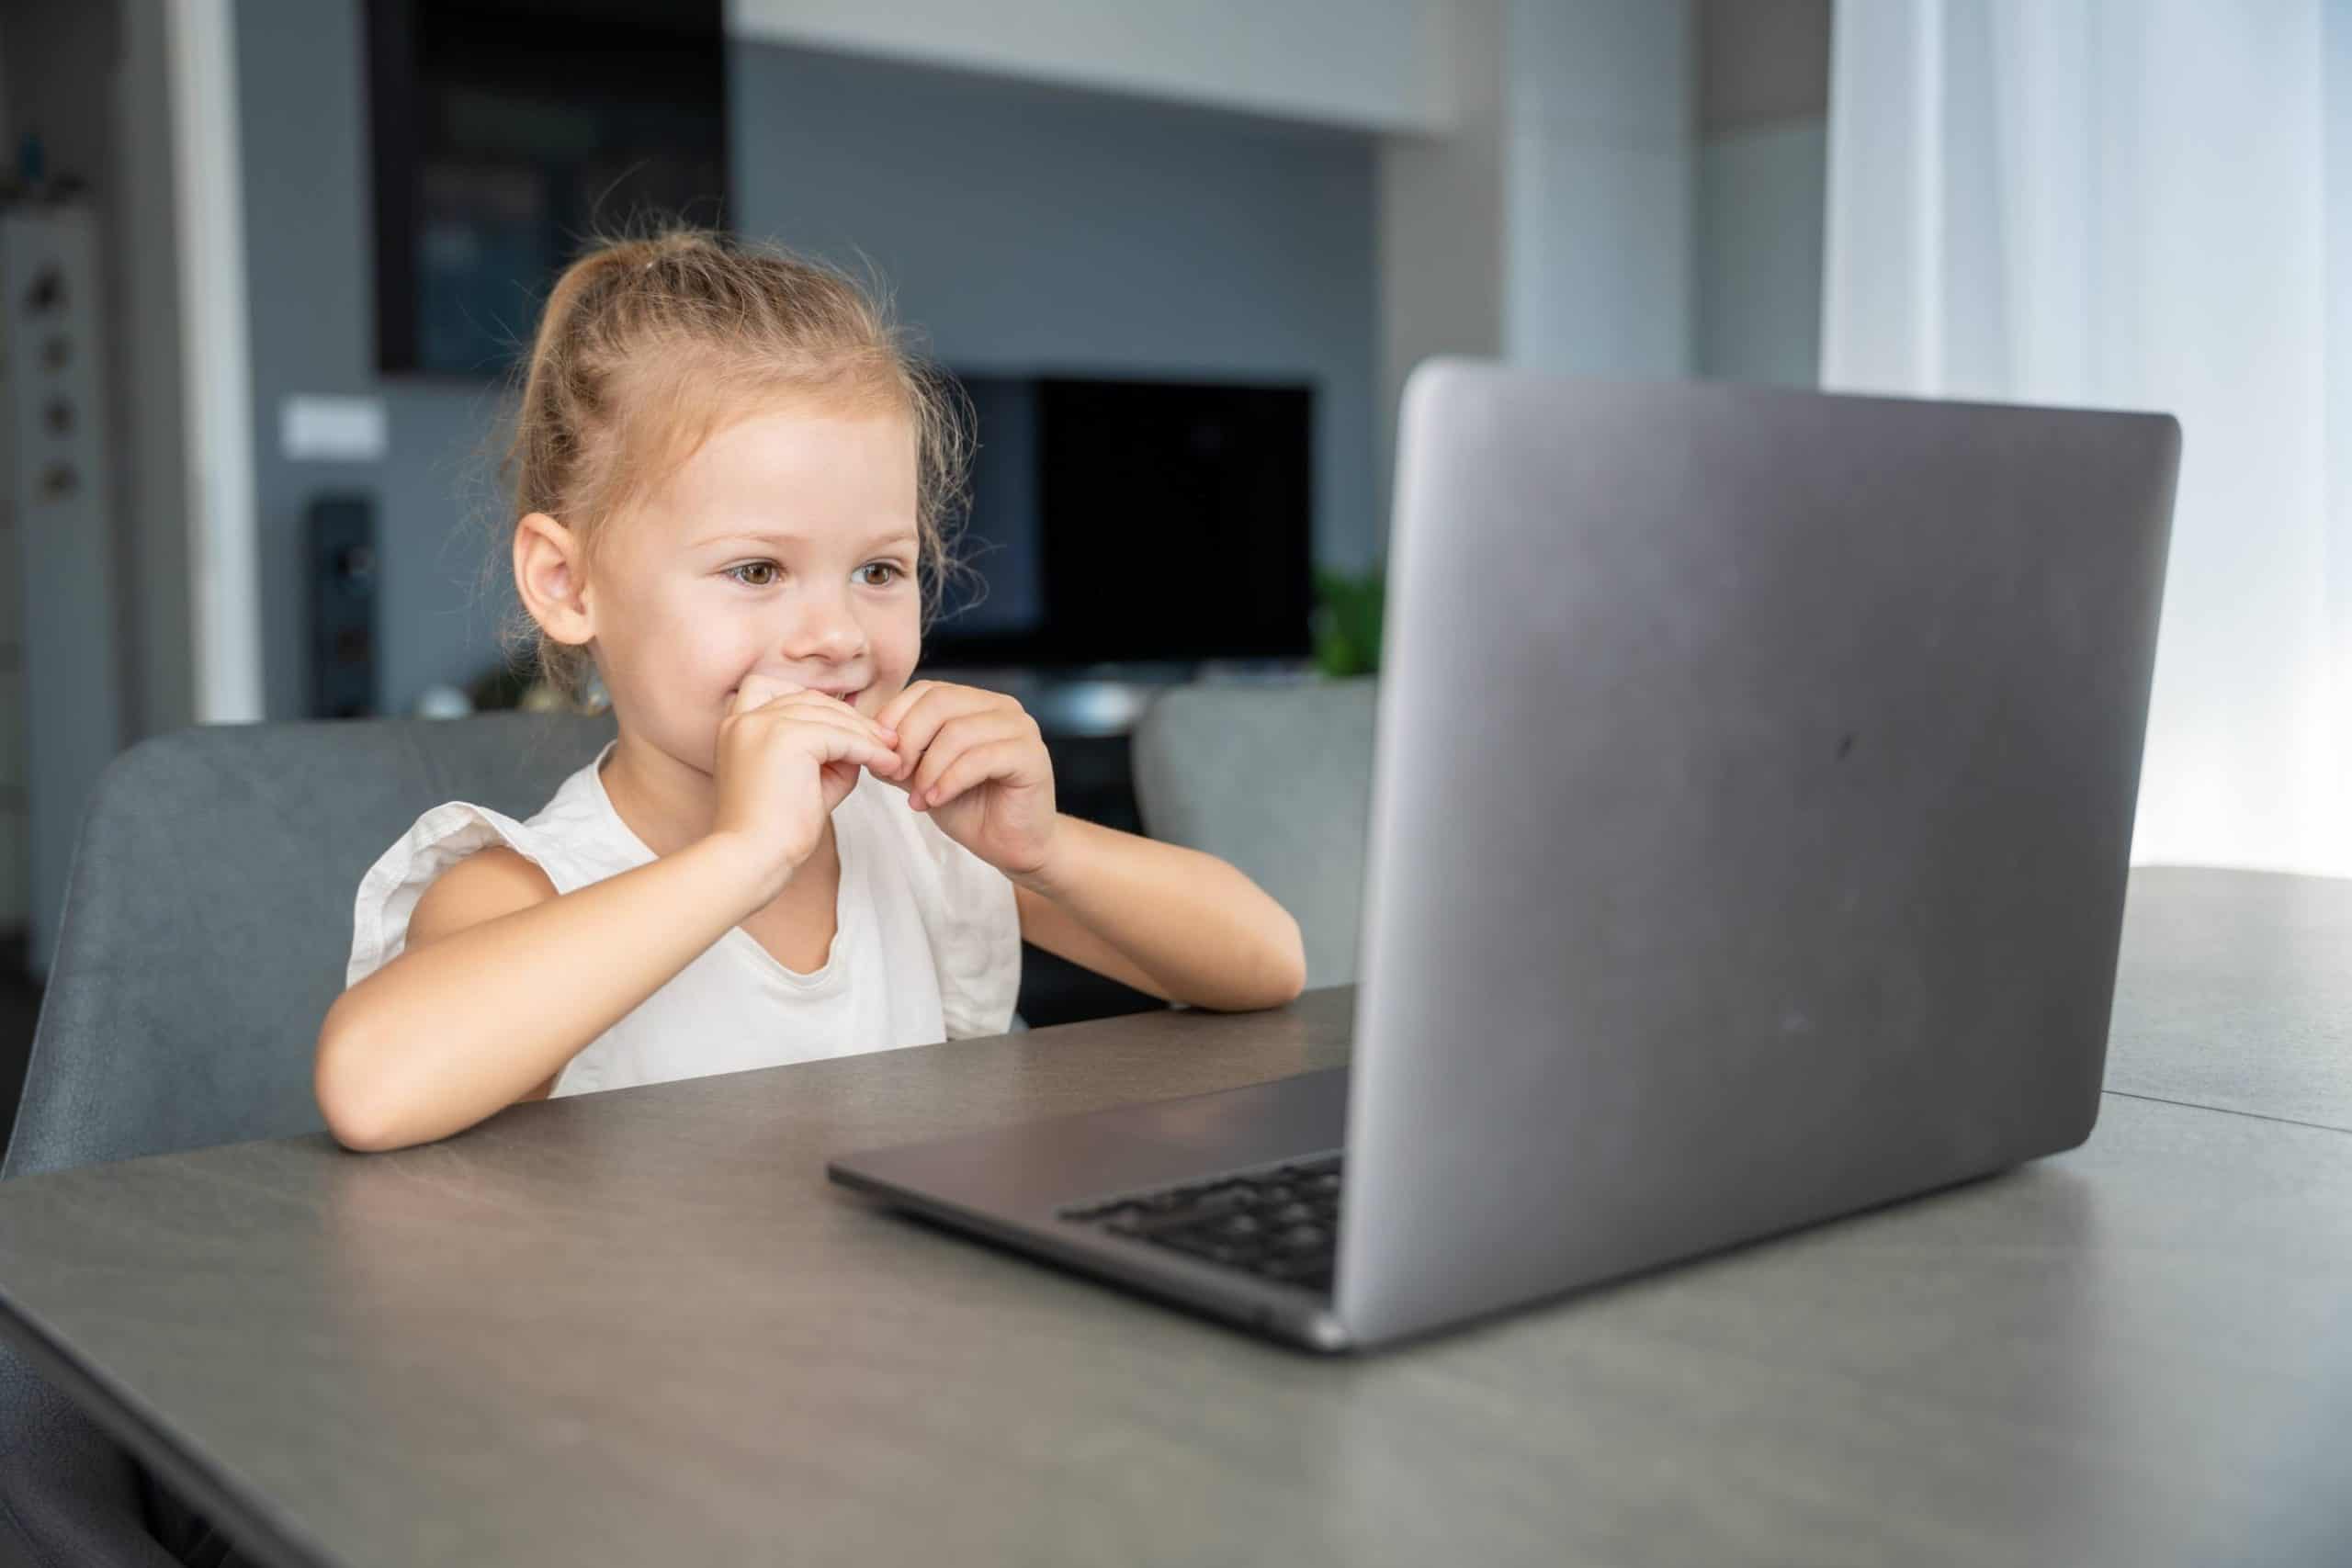 How to choose the right online acting class for your child